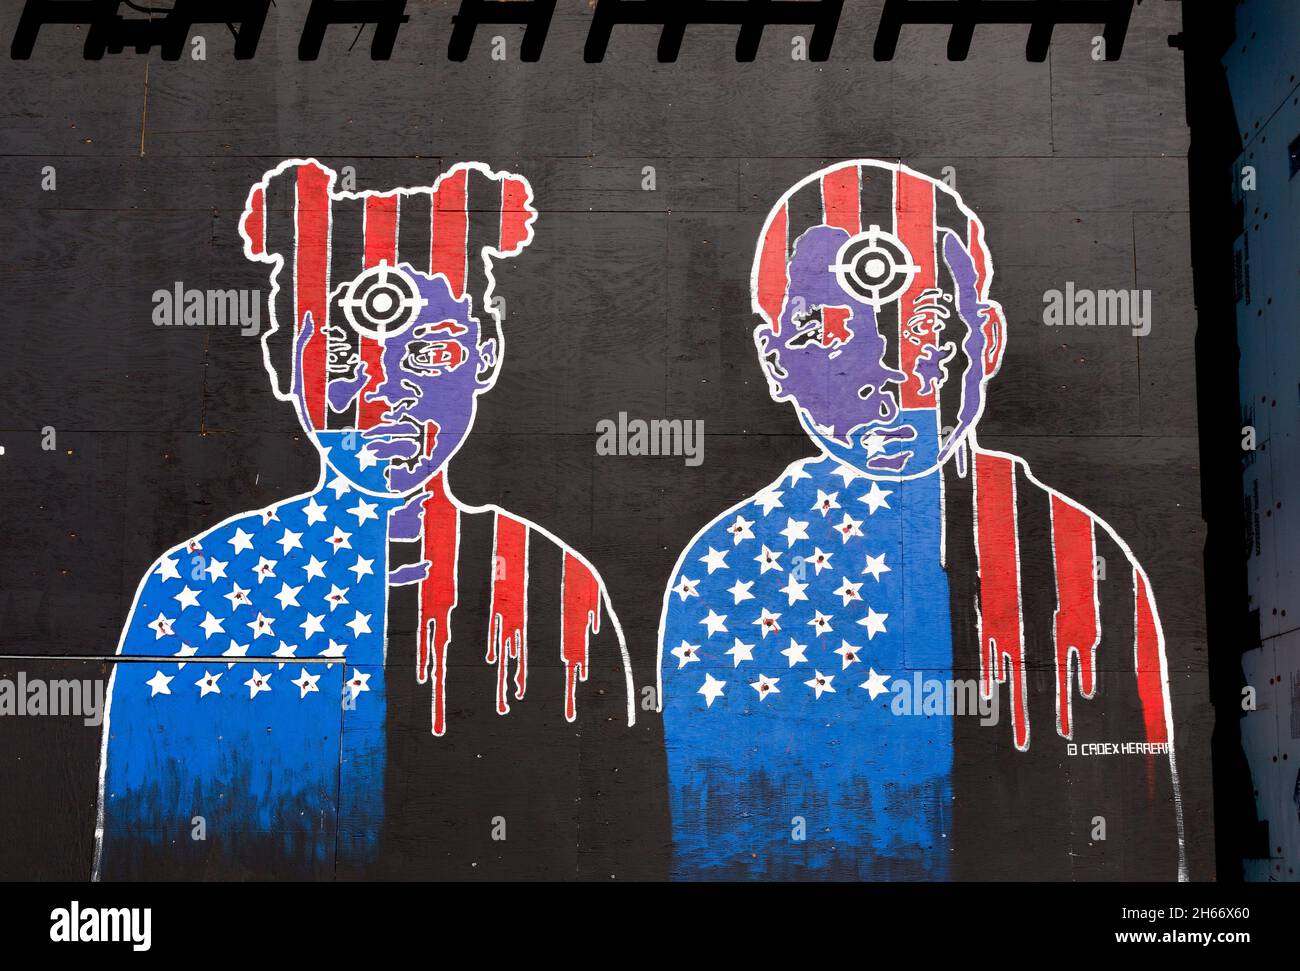 Detail of an unfinished While Black Project mural by Cadex Herrera with two young people with gun sight targets on their the foreheads illustrating th Stock Photo